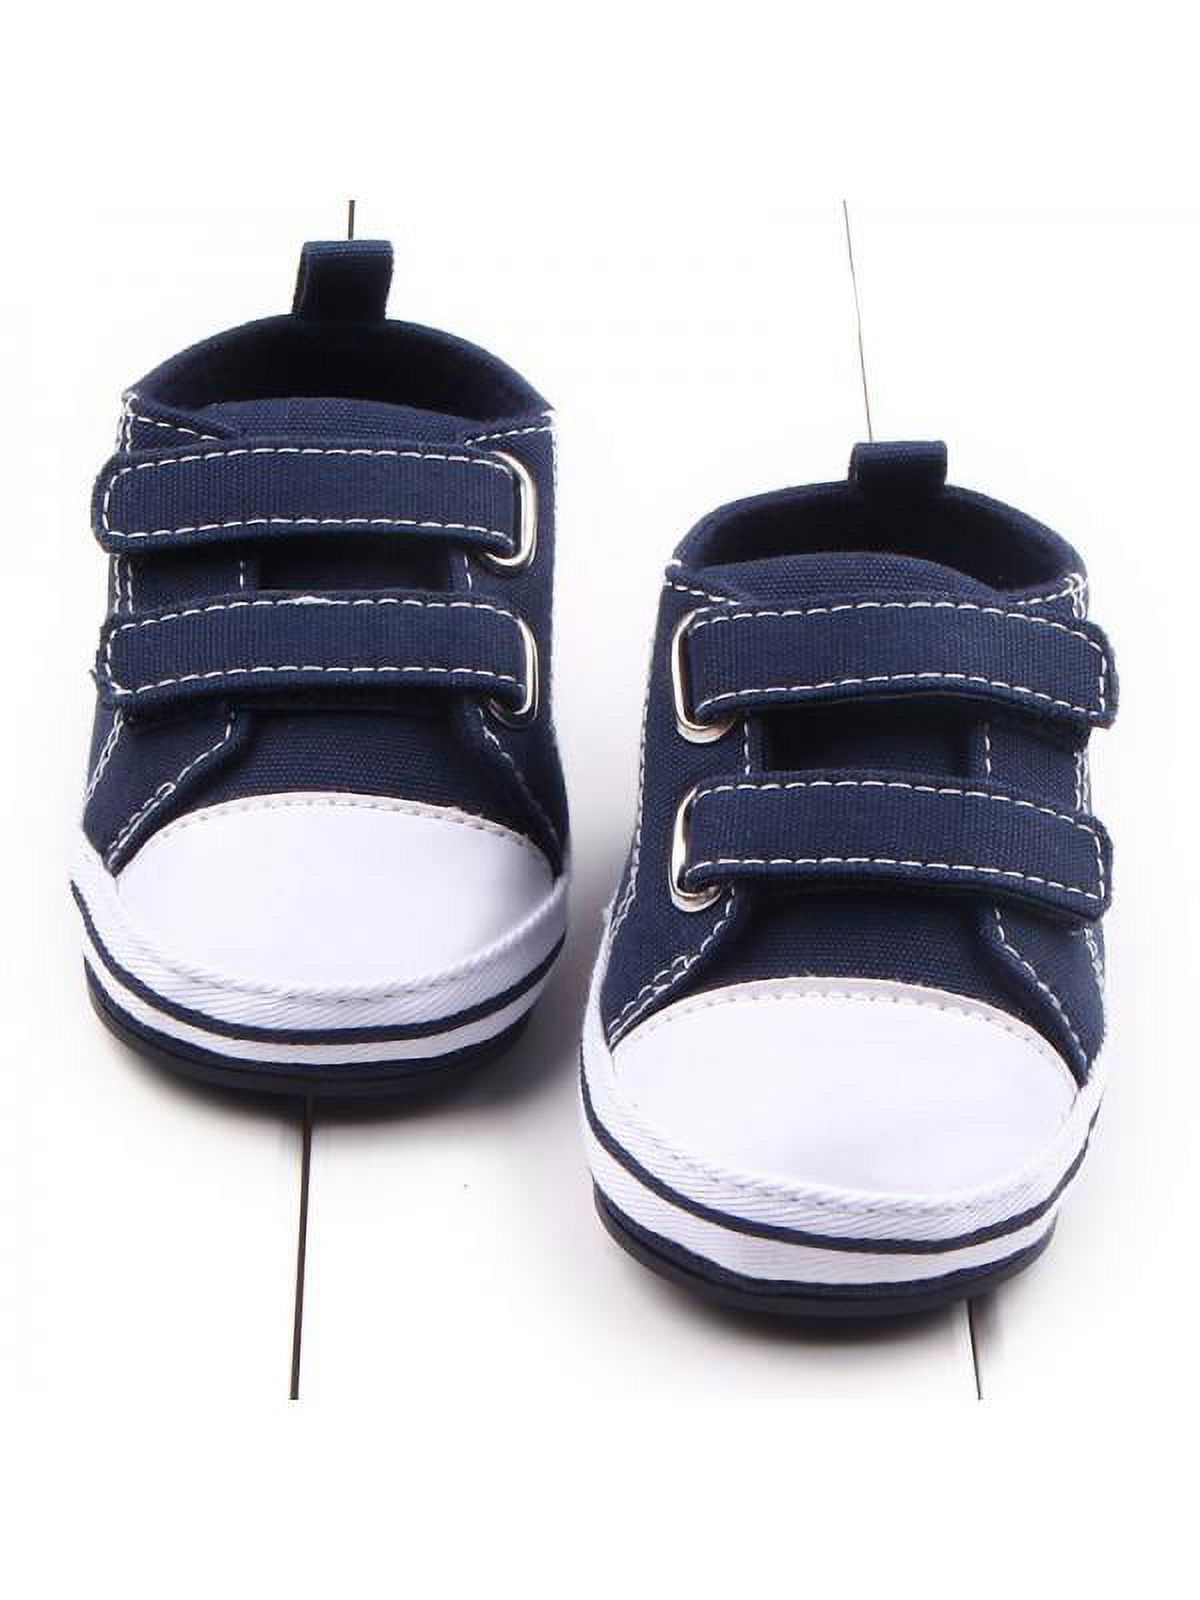 Infant Toddler Baby Boys Girls Soft Sole Crib Shoes Sneaker Newborn 0-27 Months - image 2 of 9